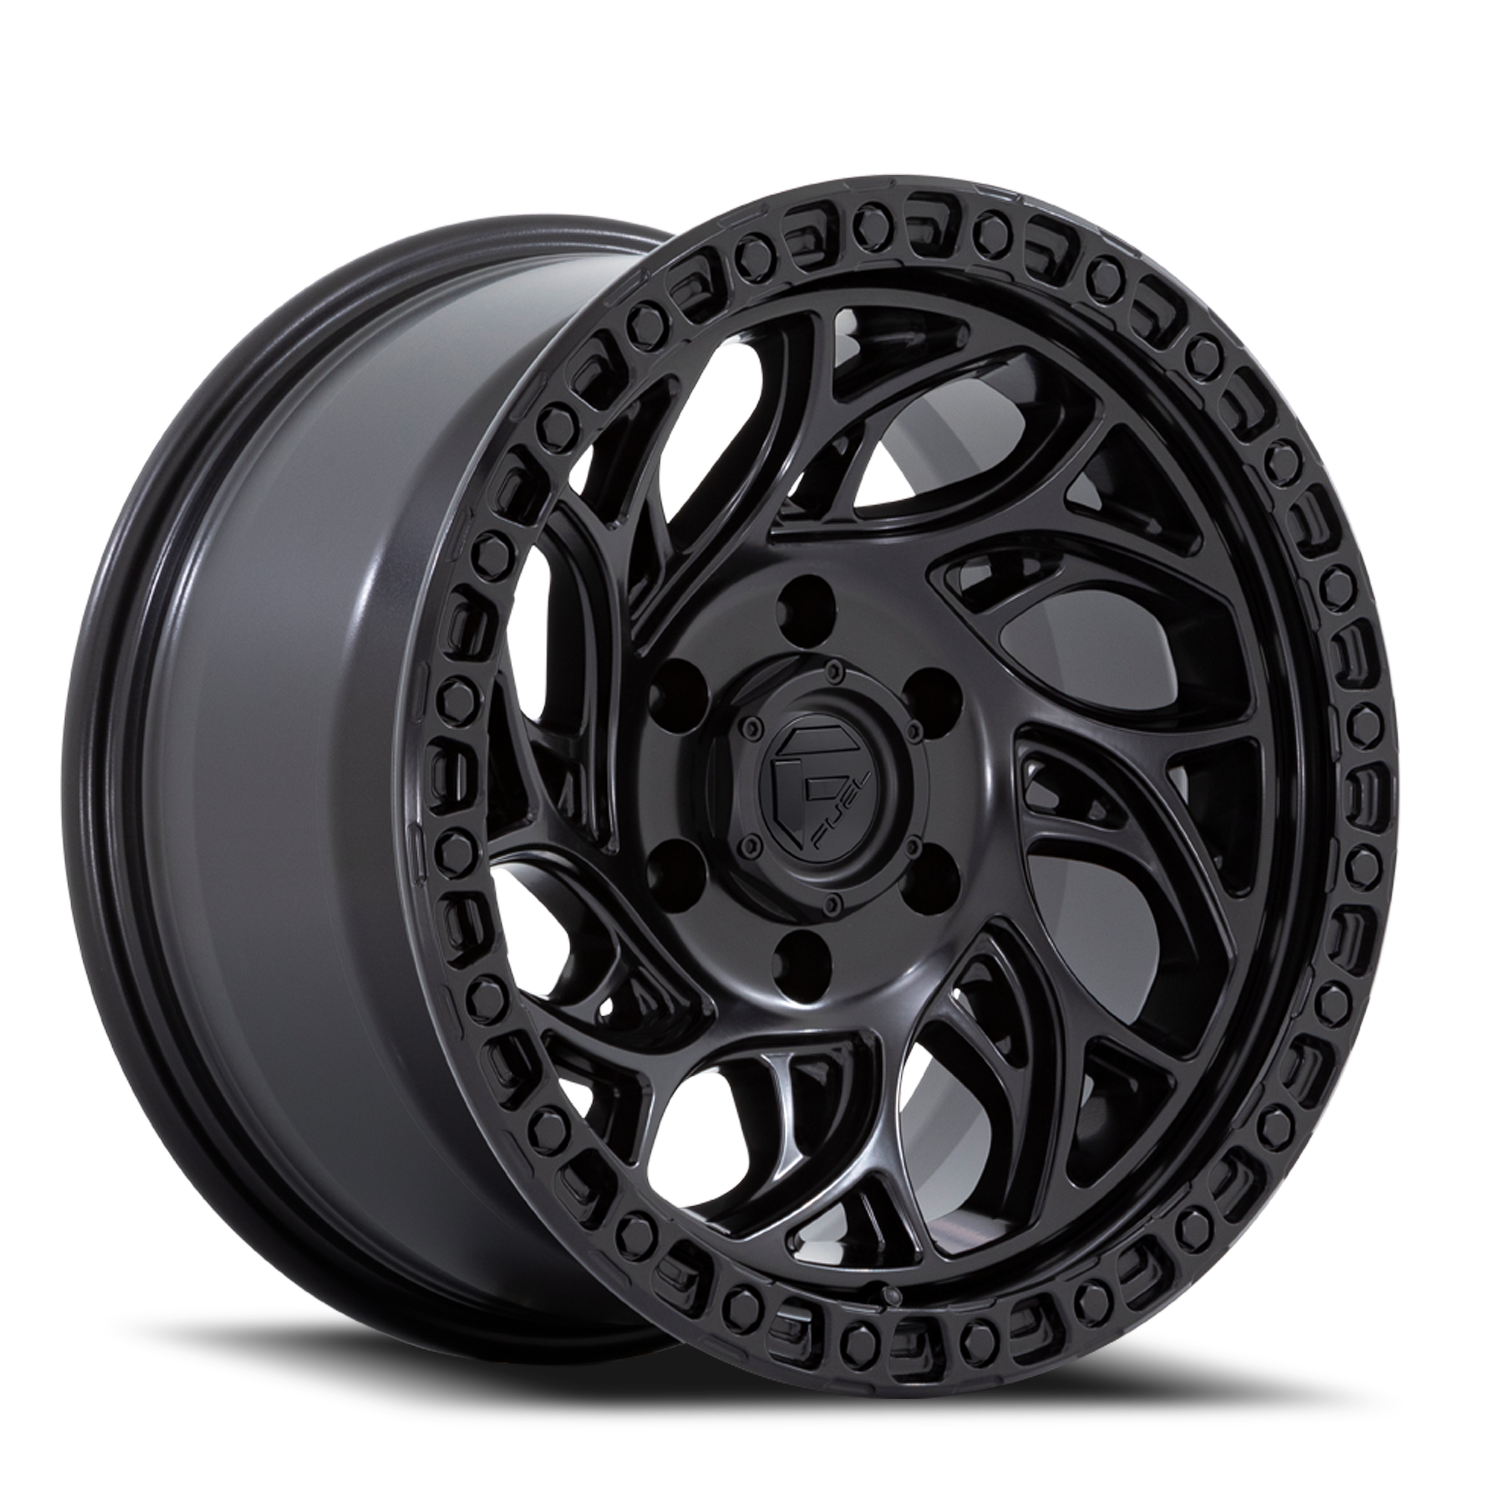 Aluminum Wheels 20X9 Runner OR D852 6 On 120 Blackout 67.06 Bore 1 Offset Fuel Off Road Wheels